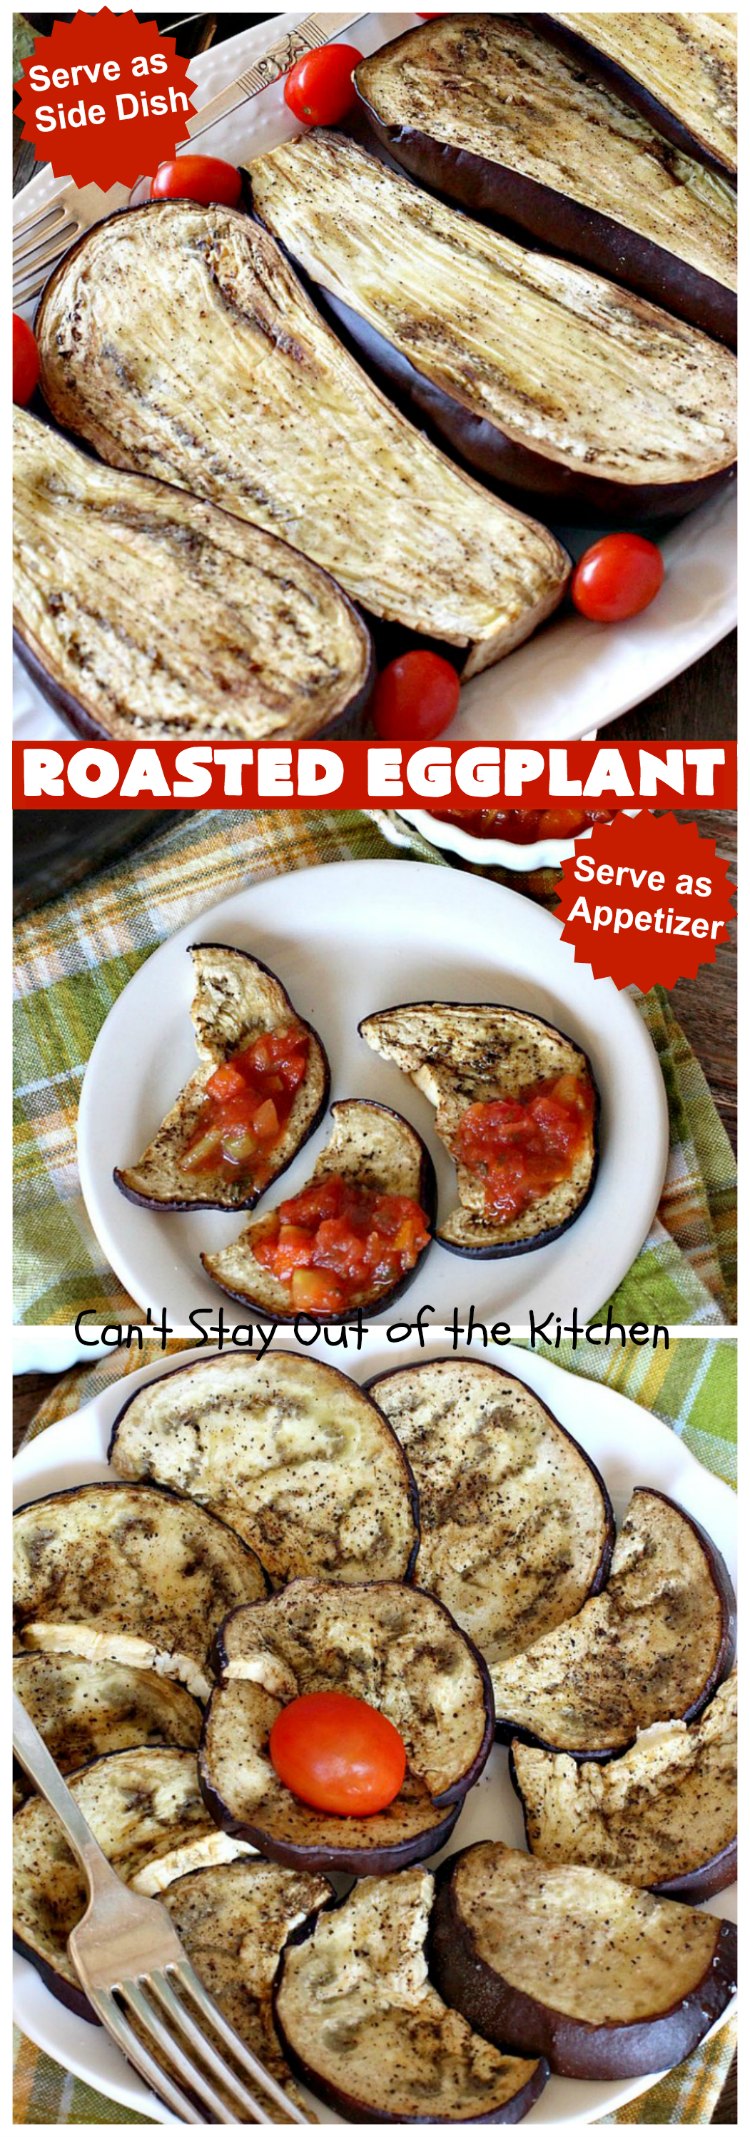 Roasted Eggplant | Can't Stay Out of the Kitchen | easy 4-ingredient #recipe can be served as an #appetizer or as a #SideDish. It's terrific for potlucks & #tailgating parties served with salsa or hummus. As a side dish it's wonderful with any kind of entree. #Healthy, #LowCalorie, #CleanEating, #GlutenFree & #Vegan.  #eggplant #RoastedEggplant